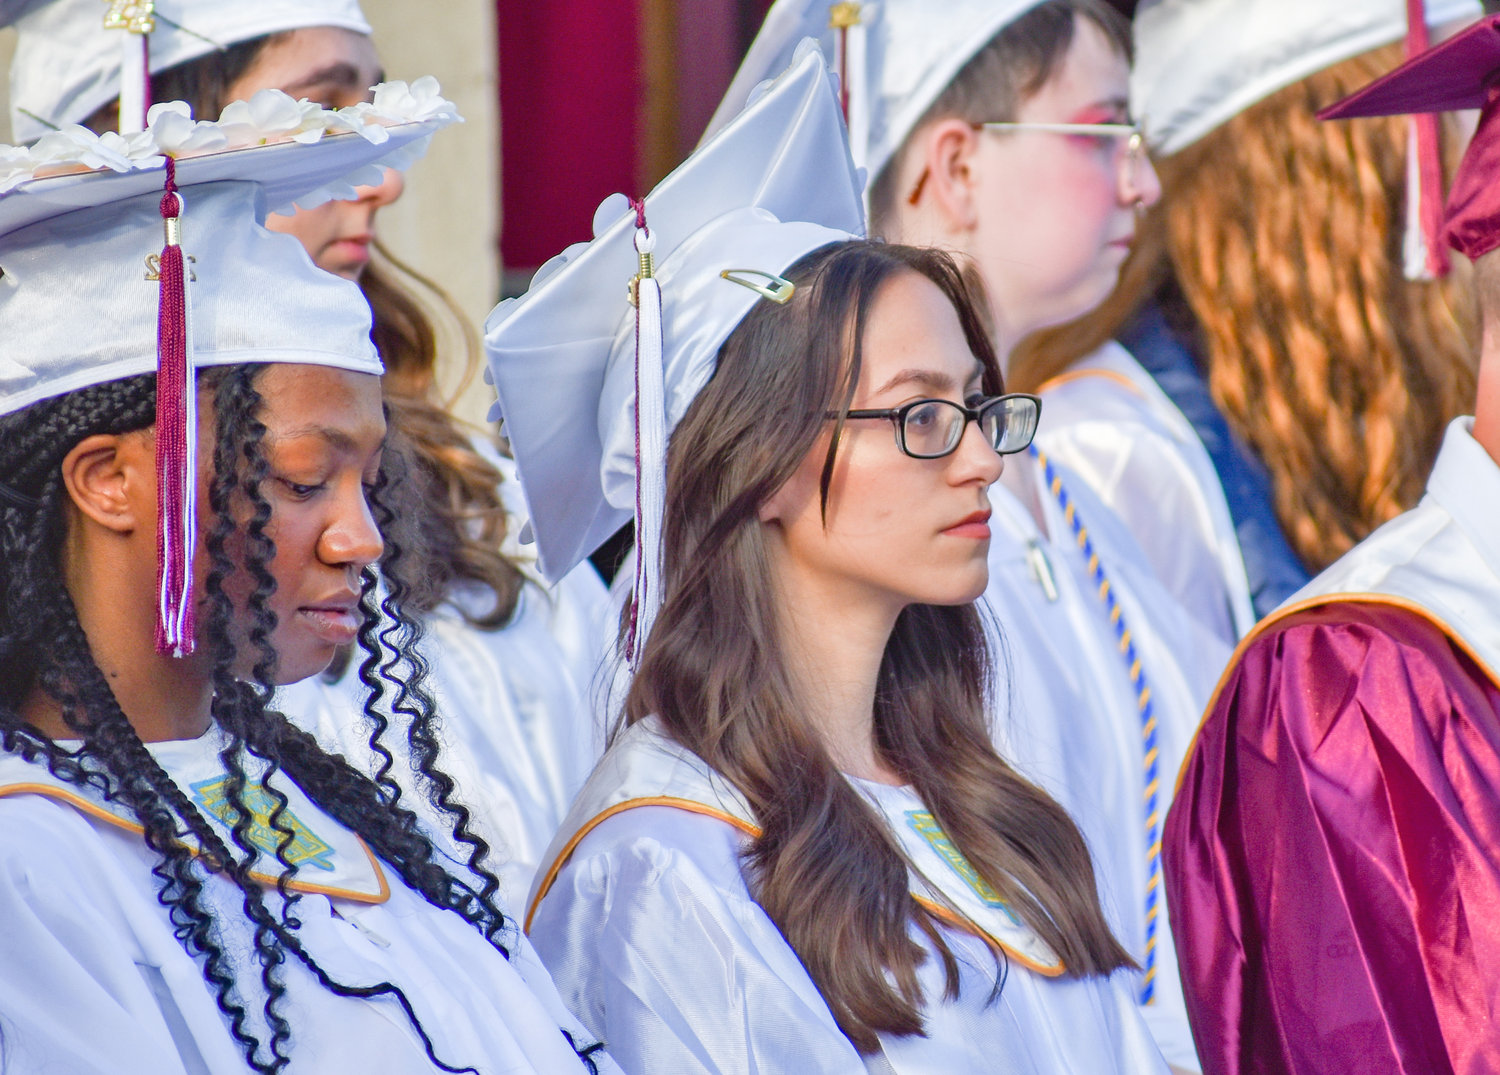 The Oriskany Class of 2022 participated in a graduation ceremony on June 24, 2022.